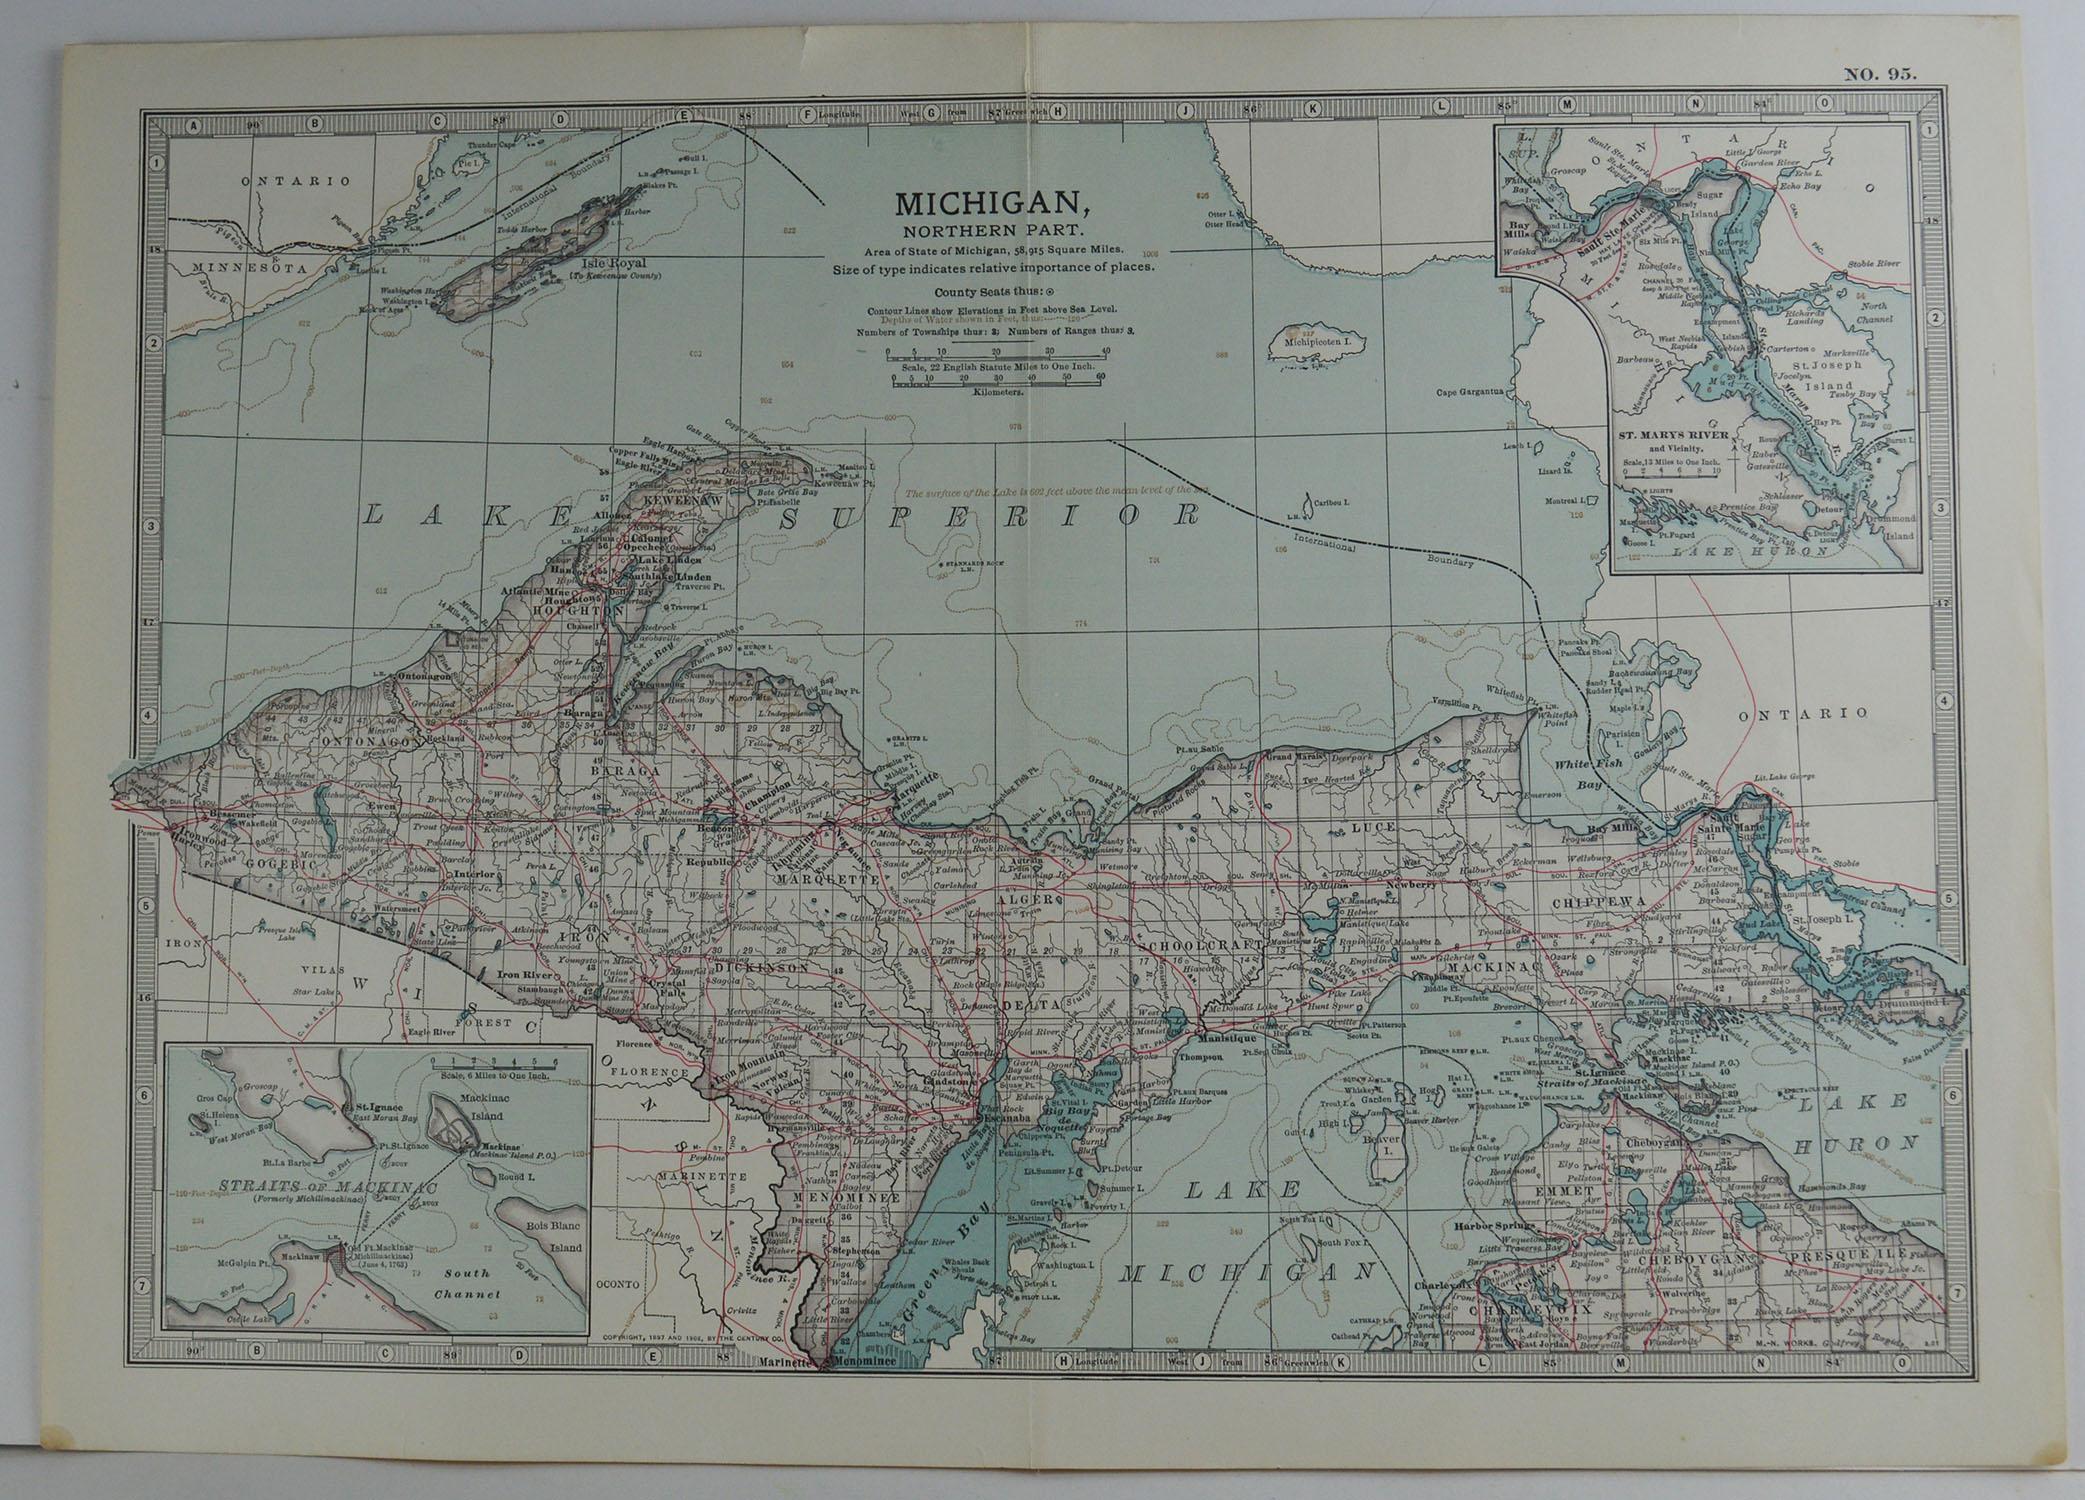 Great map of the Northern Part of Michigan

Original color.

Published circa 1890

Unframed.

Minor edge tears
 